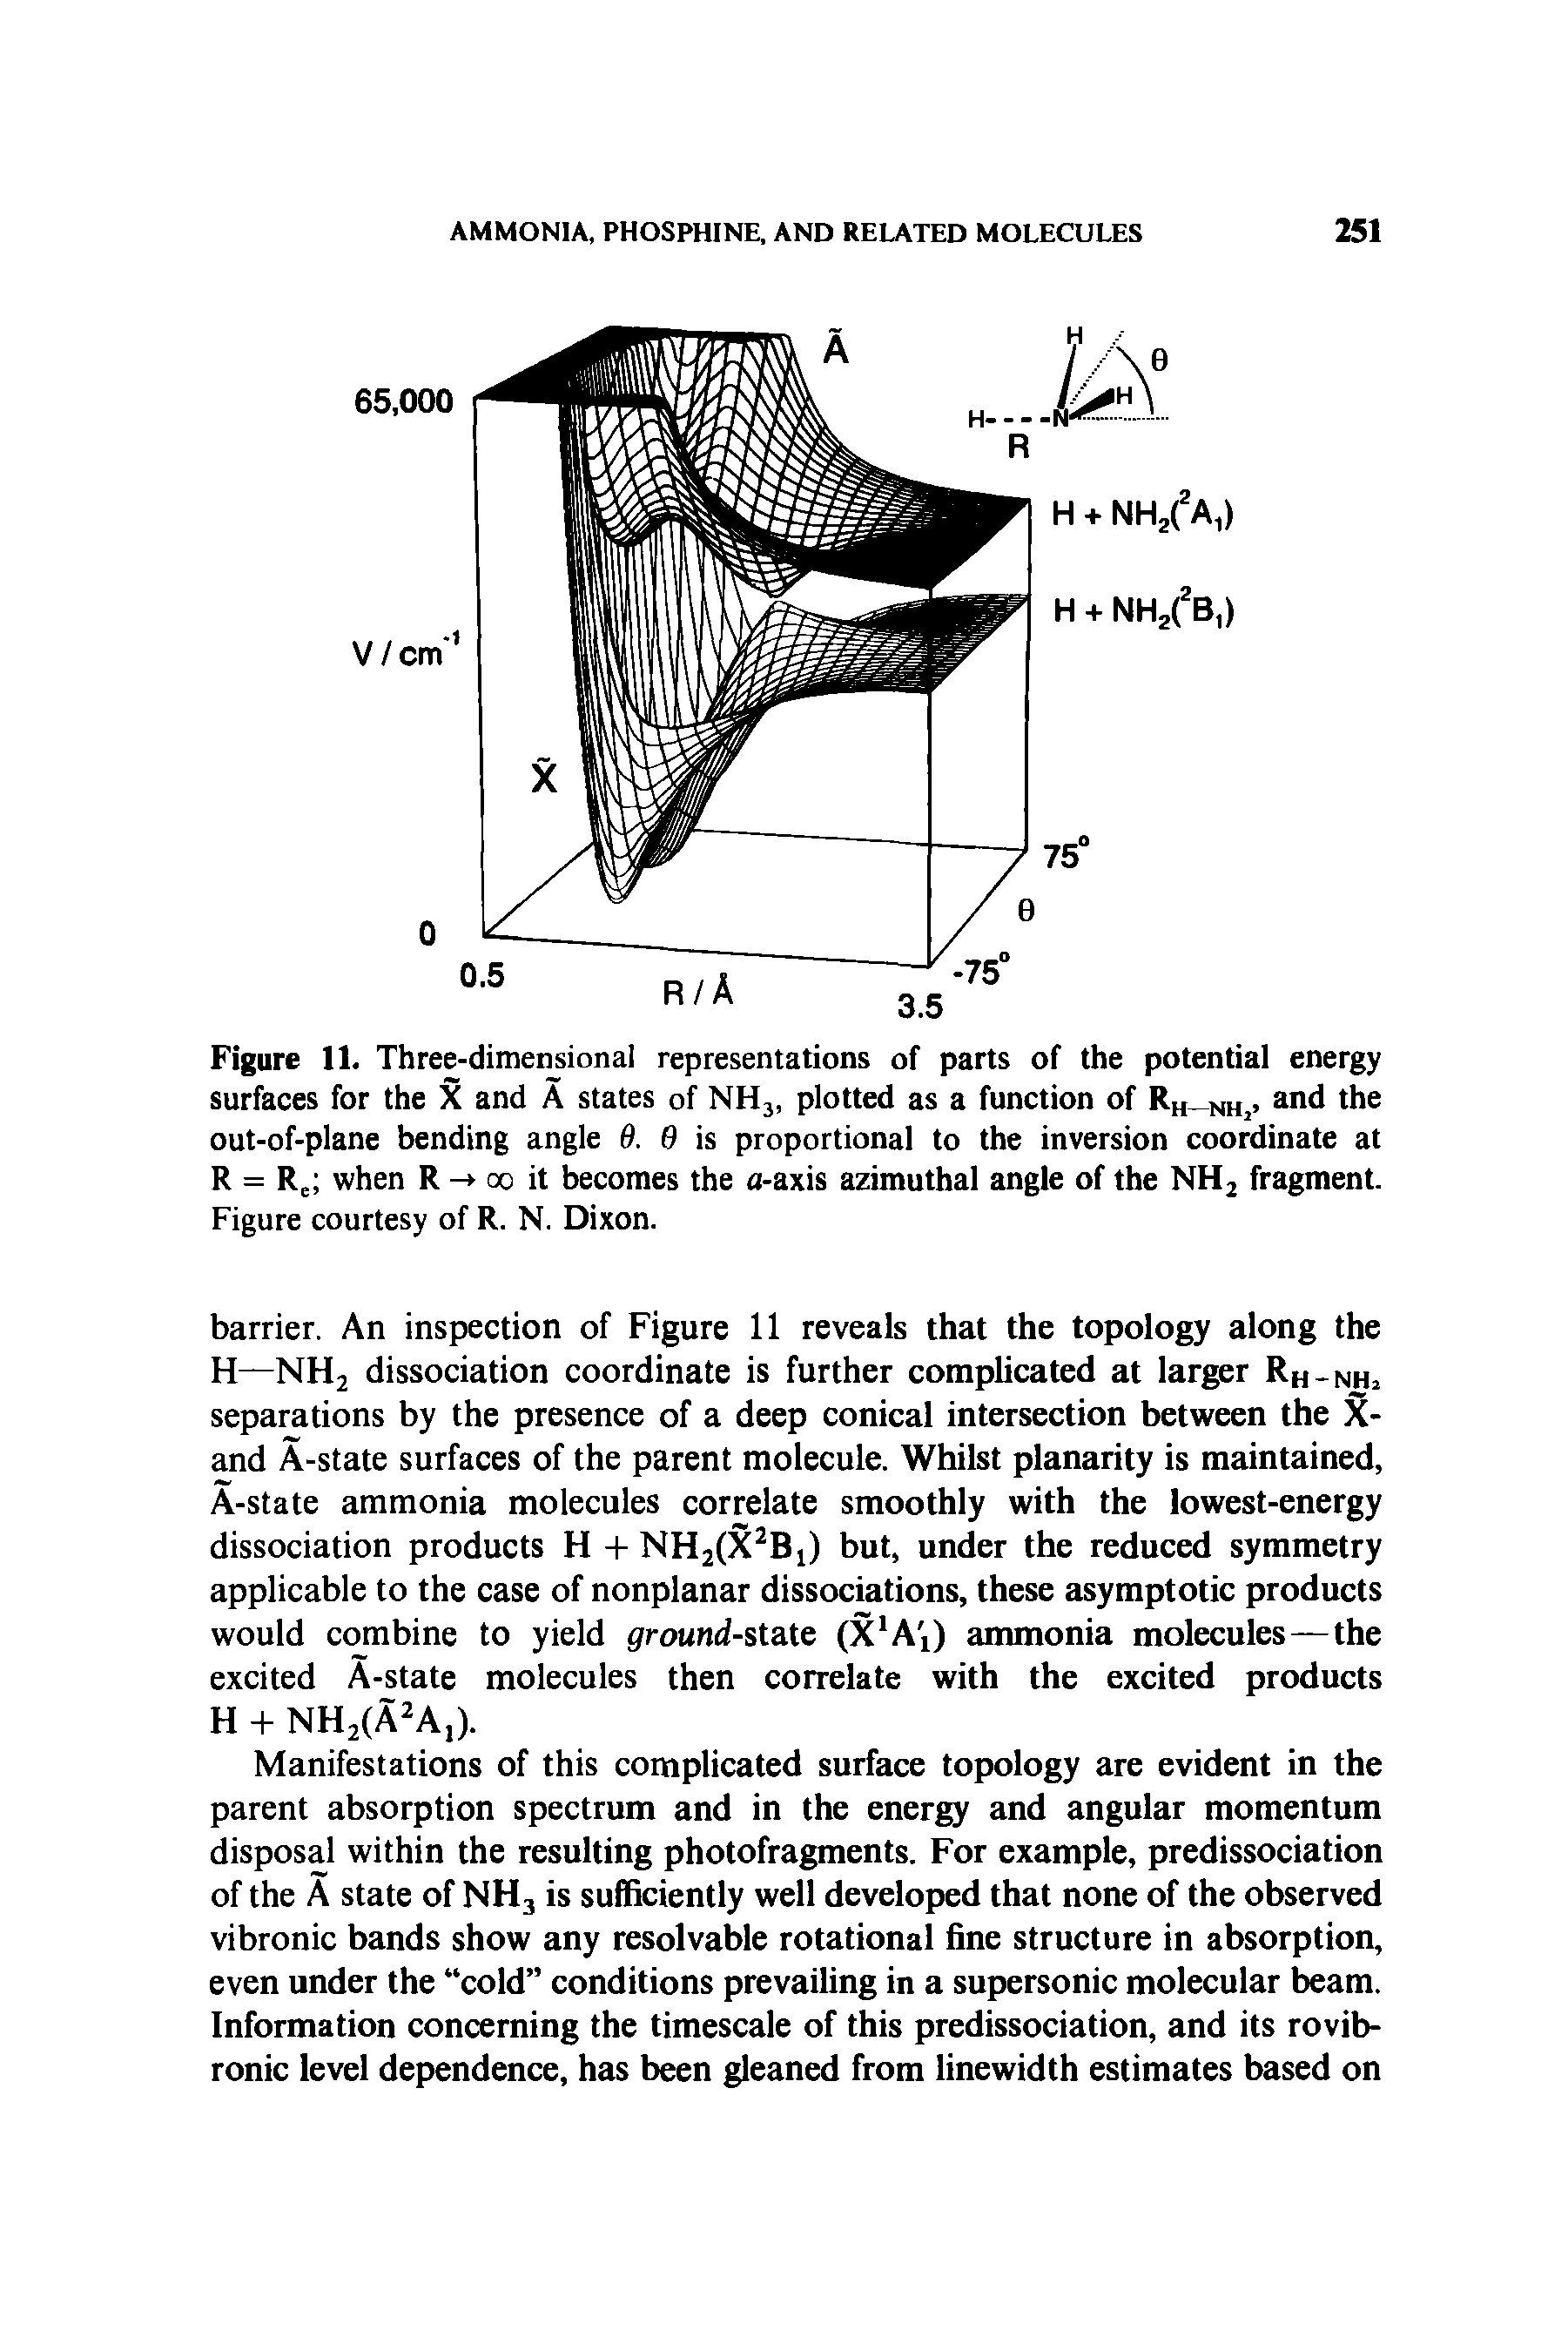 Figure 11. Three-dimensional representations of parts of the potential energy surfaces for the X and A states of NH3, plotted as a function of Rh—nh,> nd the out-of-plane bending angle 6. 0 is proportional to the inversion coordinate at R = Rel when R 00 it becomes the a-axis azimuthal angle of the NHj fragment. Figure courtesy of R. N. Dixon.